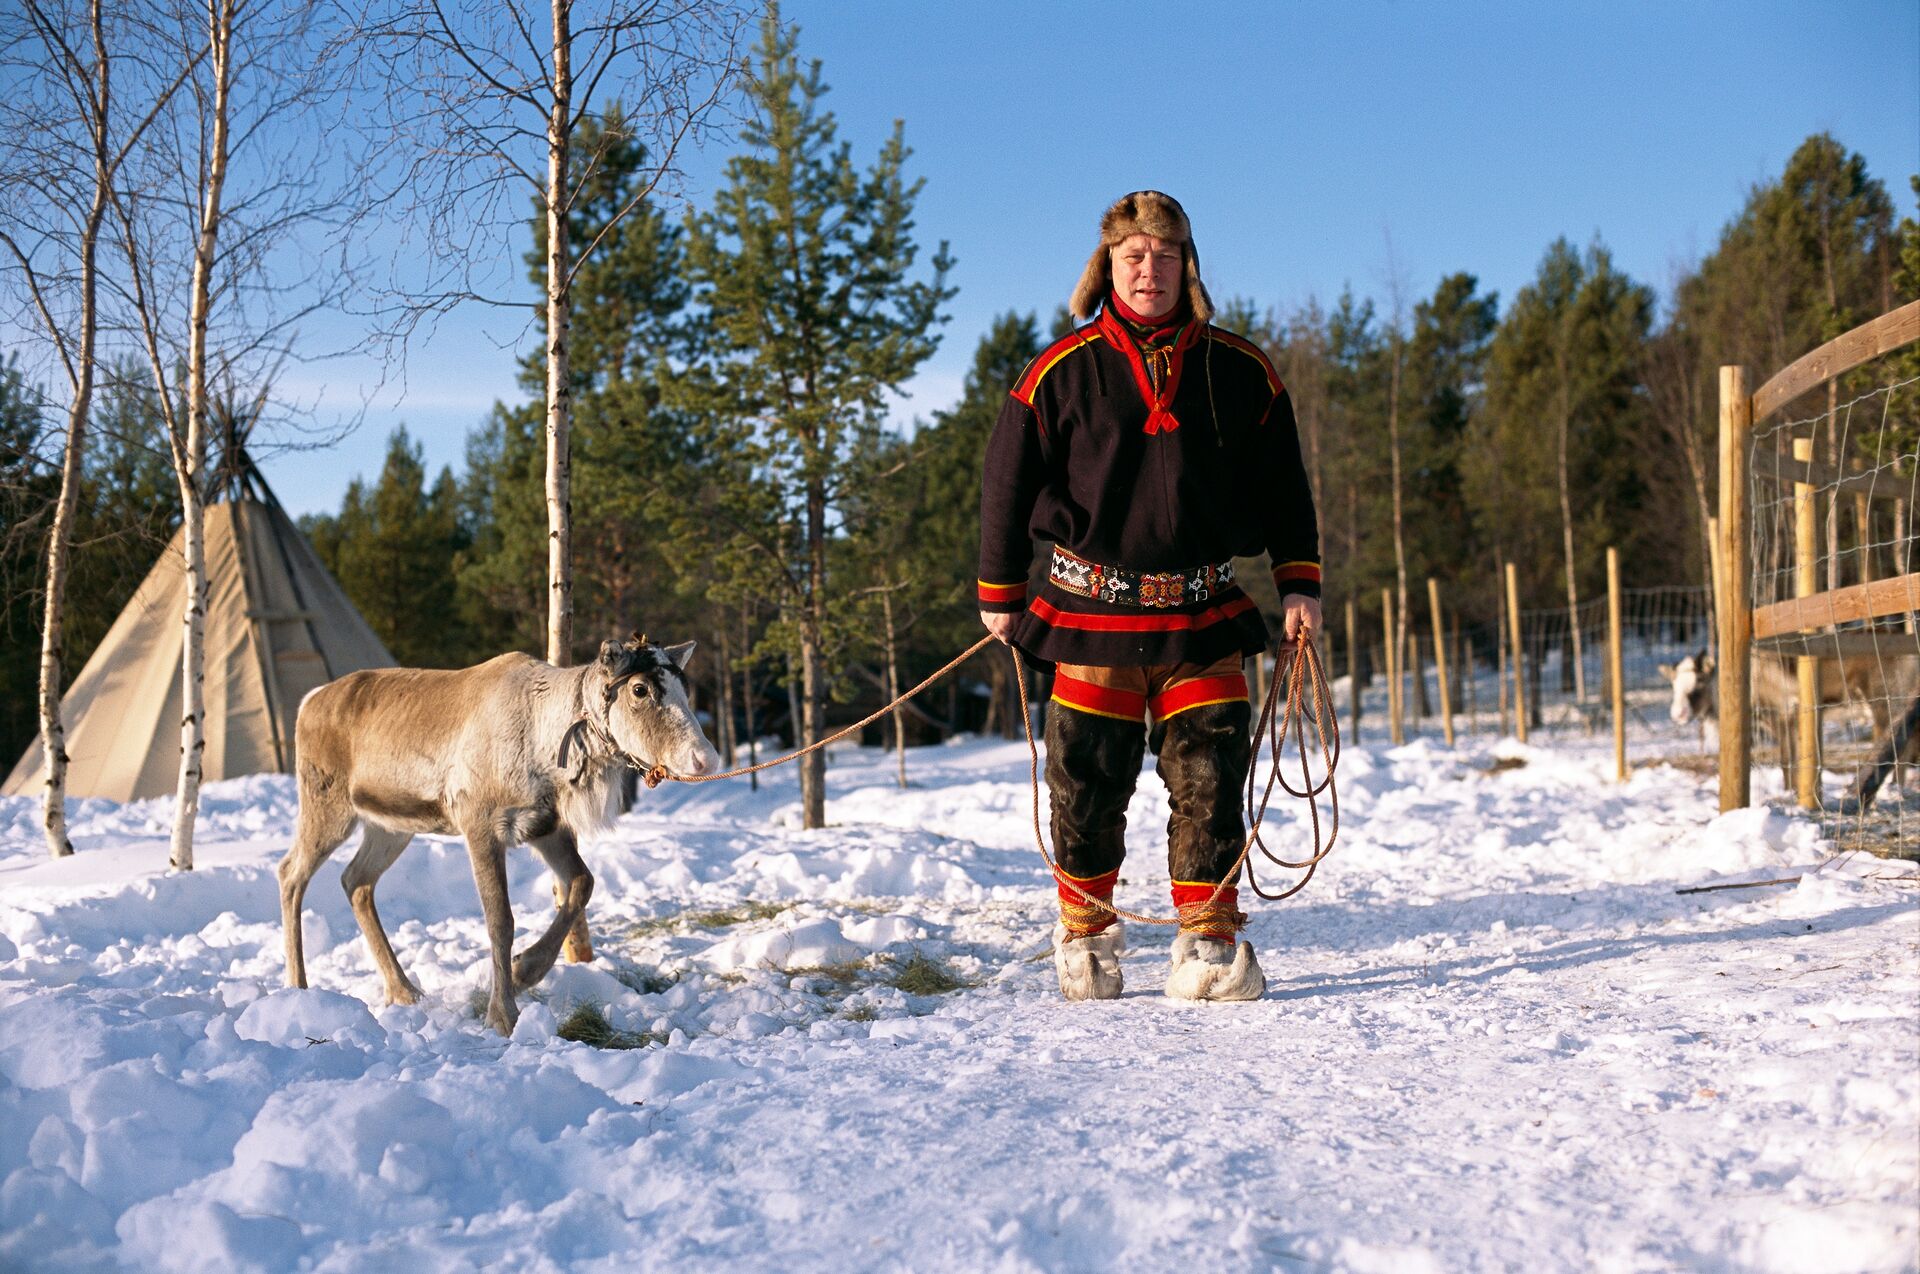 A Sami reindeer breeder wearing traditional regalia, holding a reindeer on a lead, with pine trees and a teepee-style shelter in the background